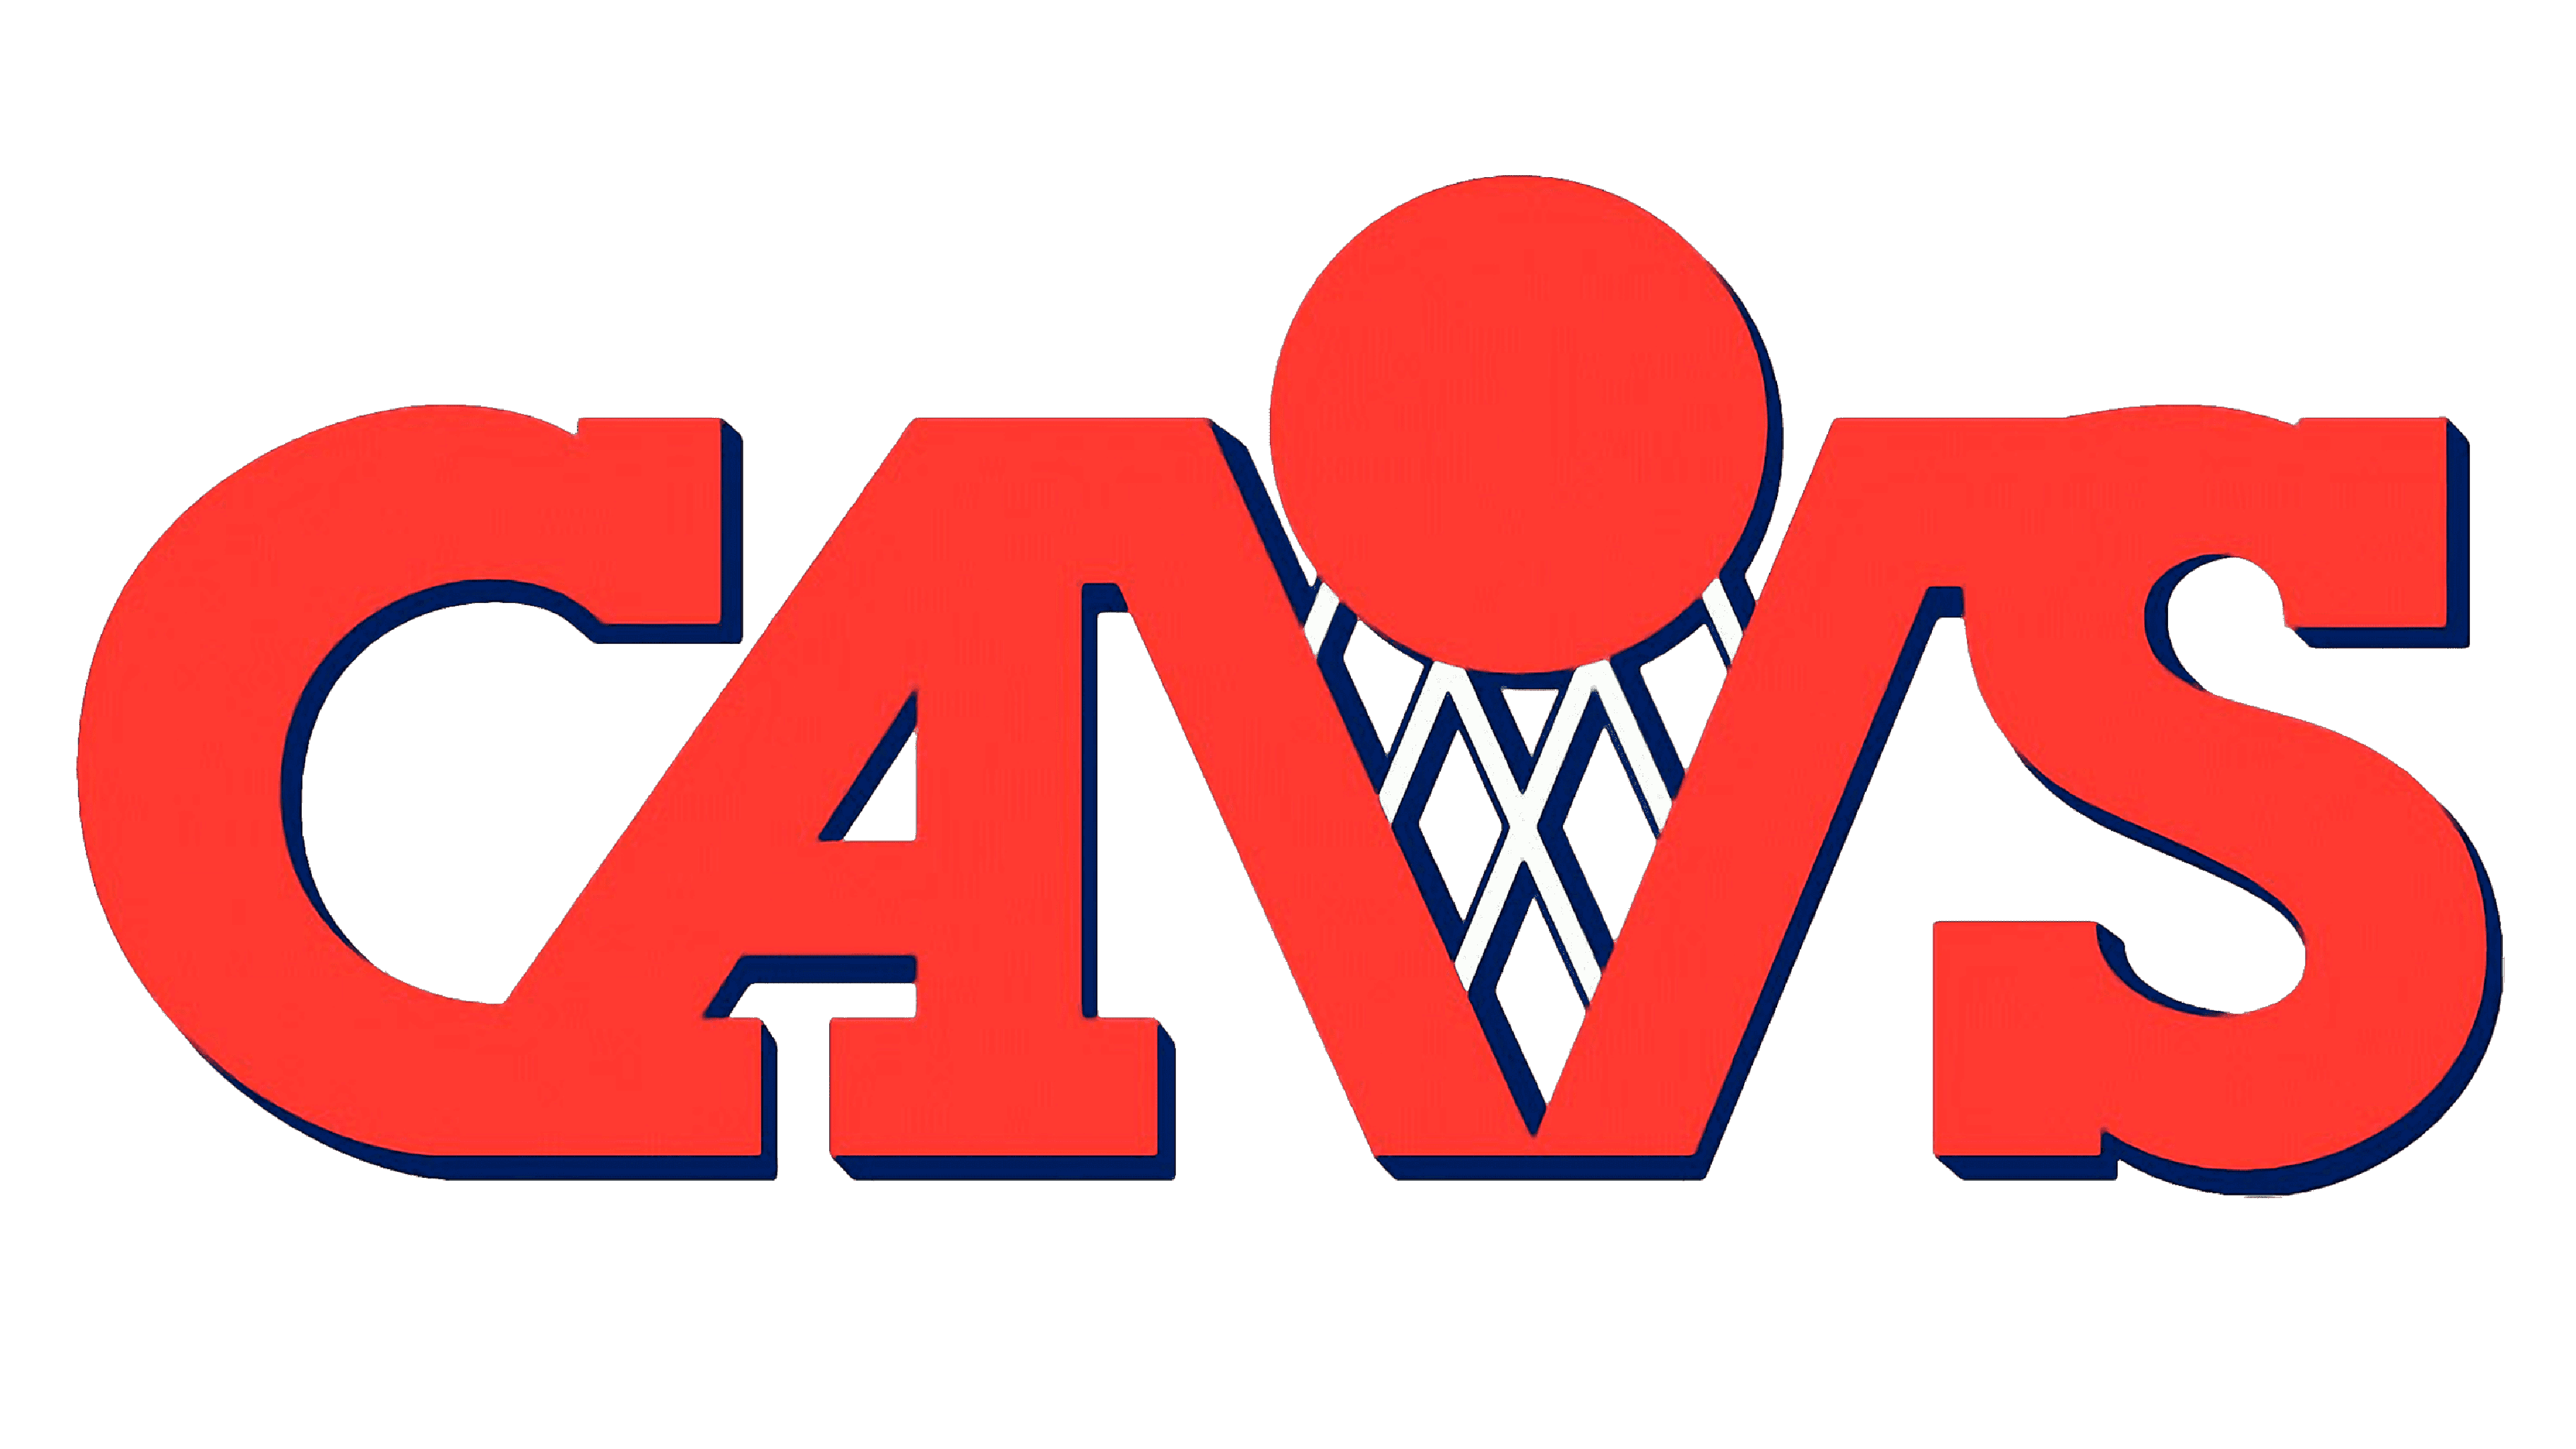 CAVS Logo and symbol, meaning, history, PNG, brand